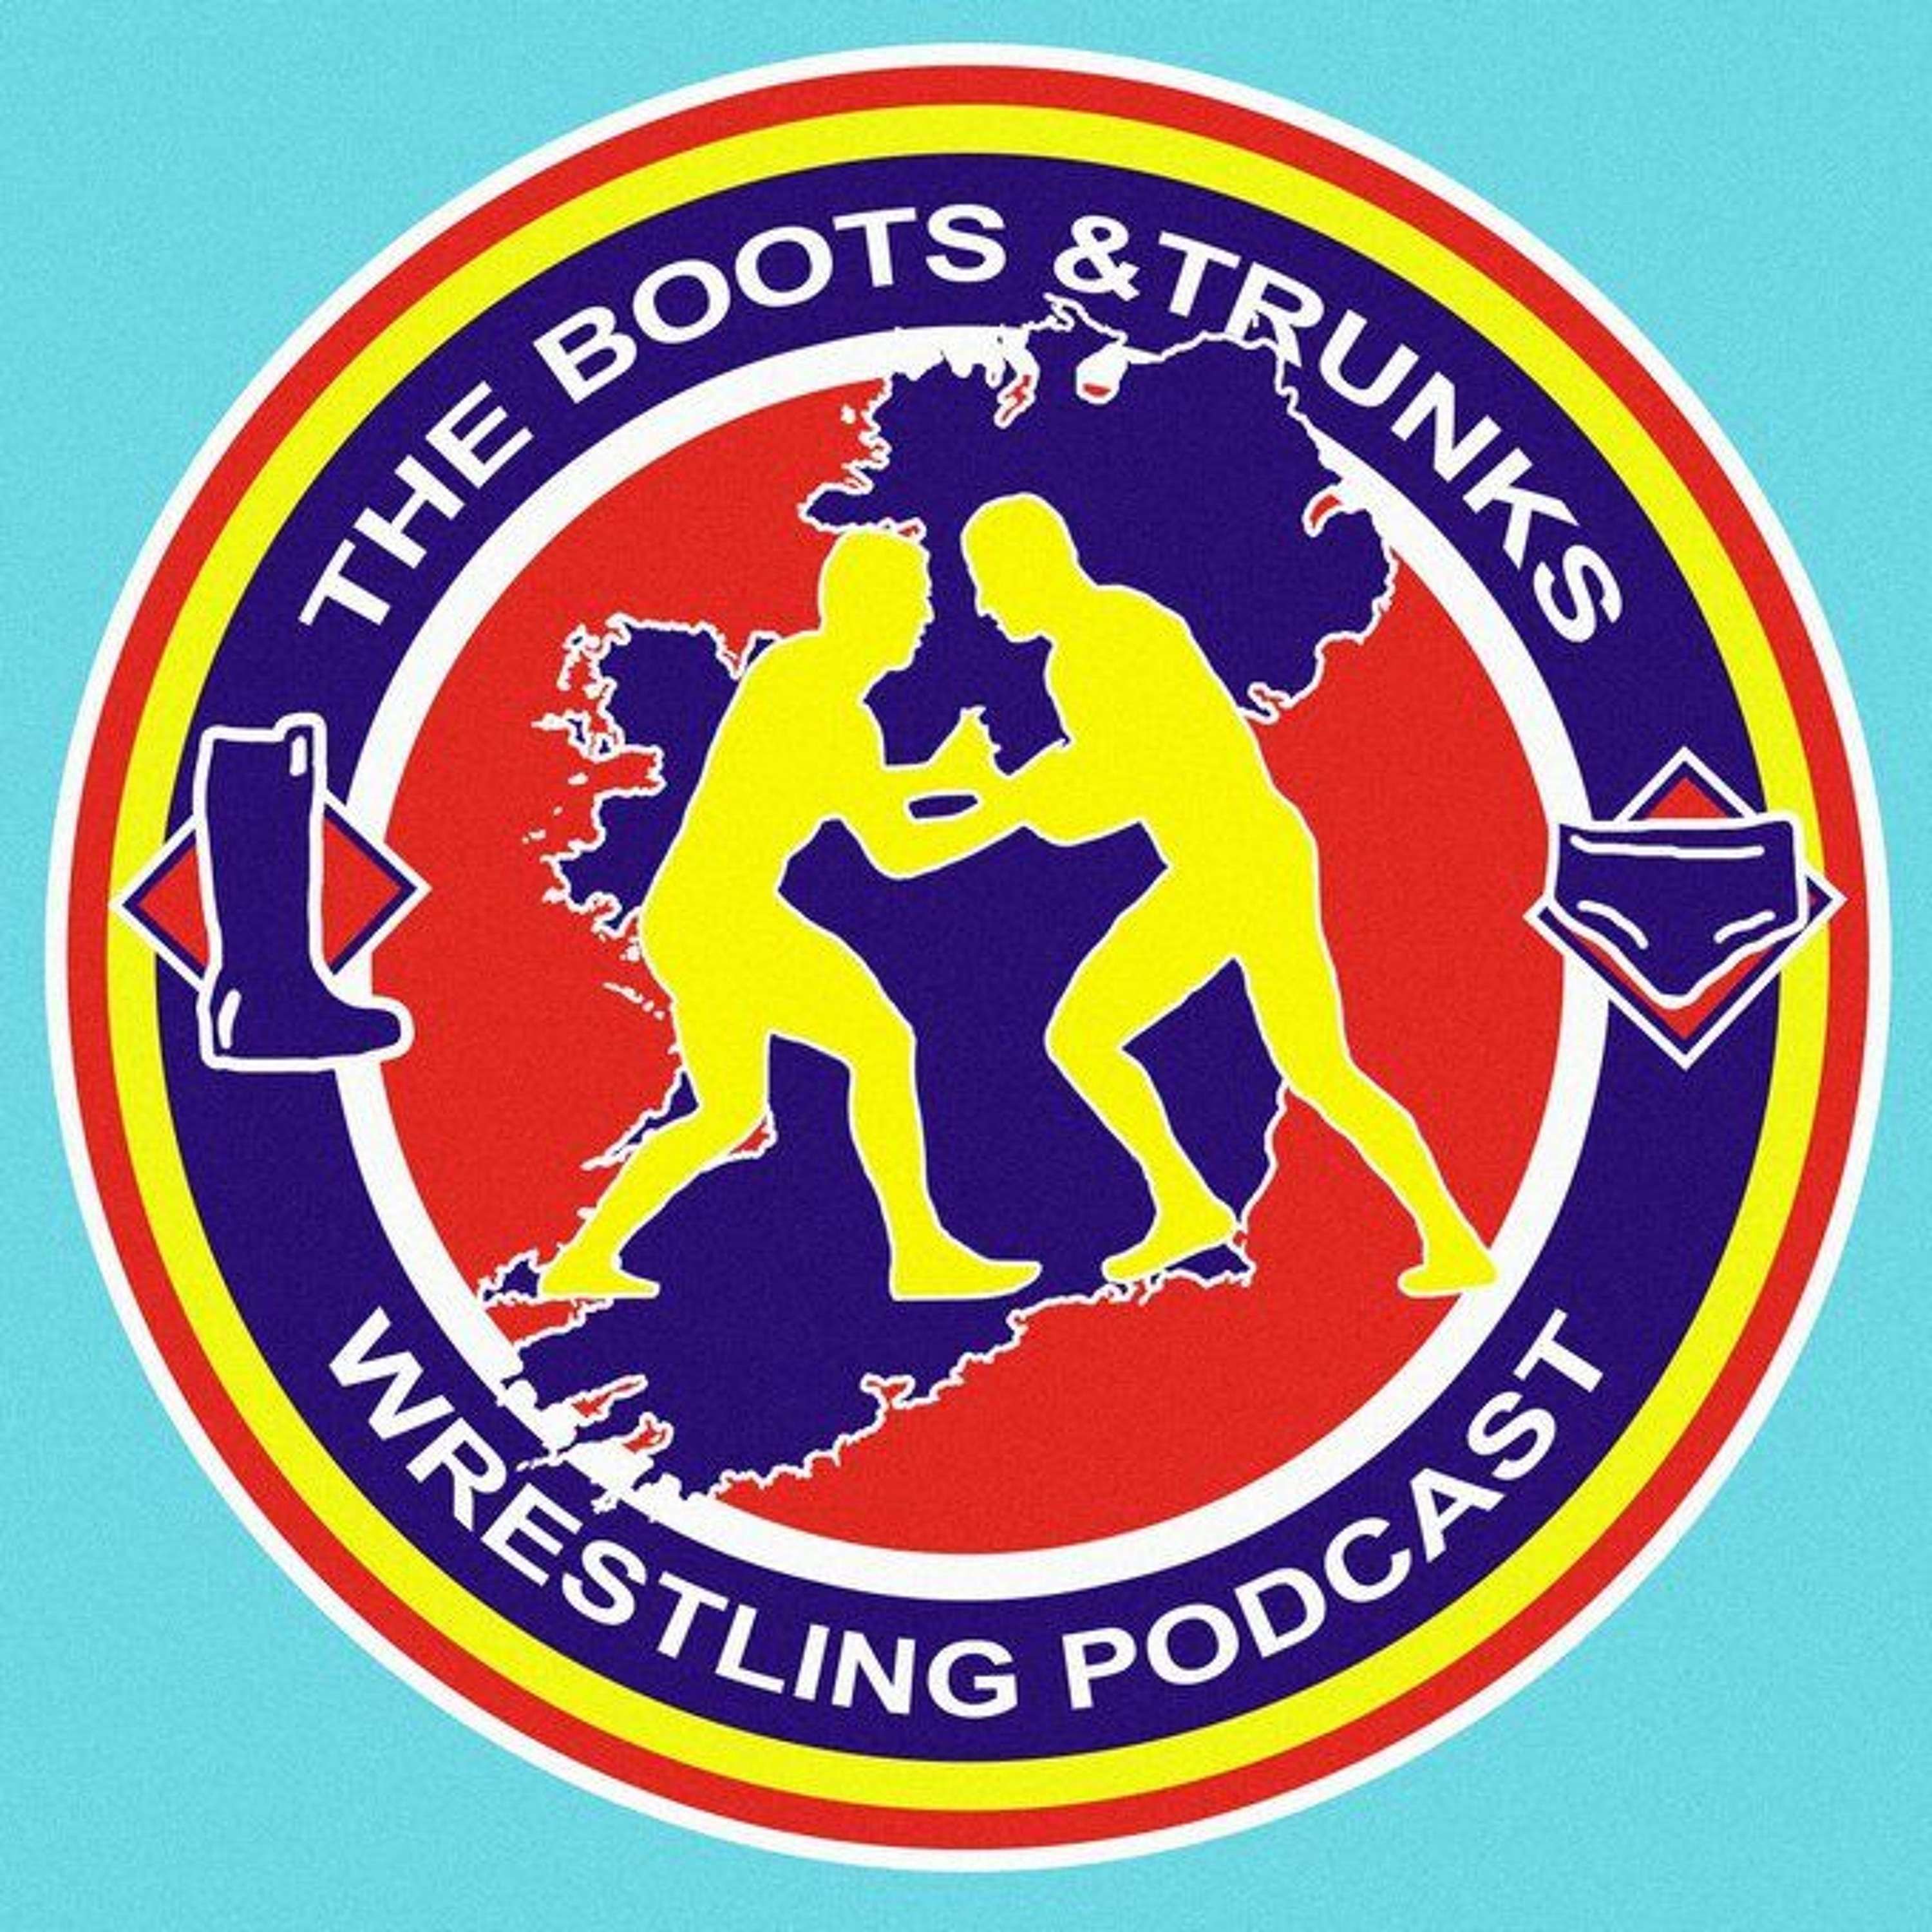 Boots and Trunks Podcast: Episode 0